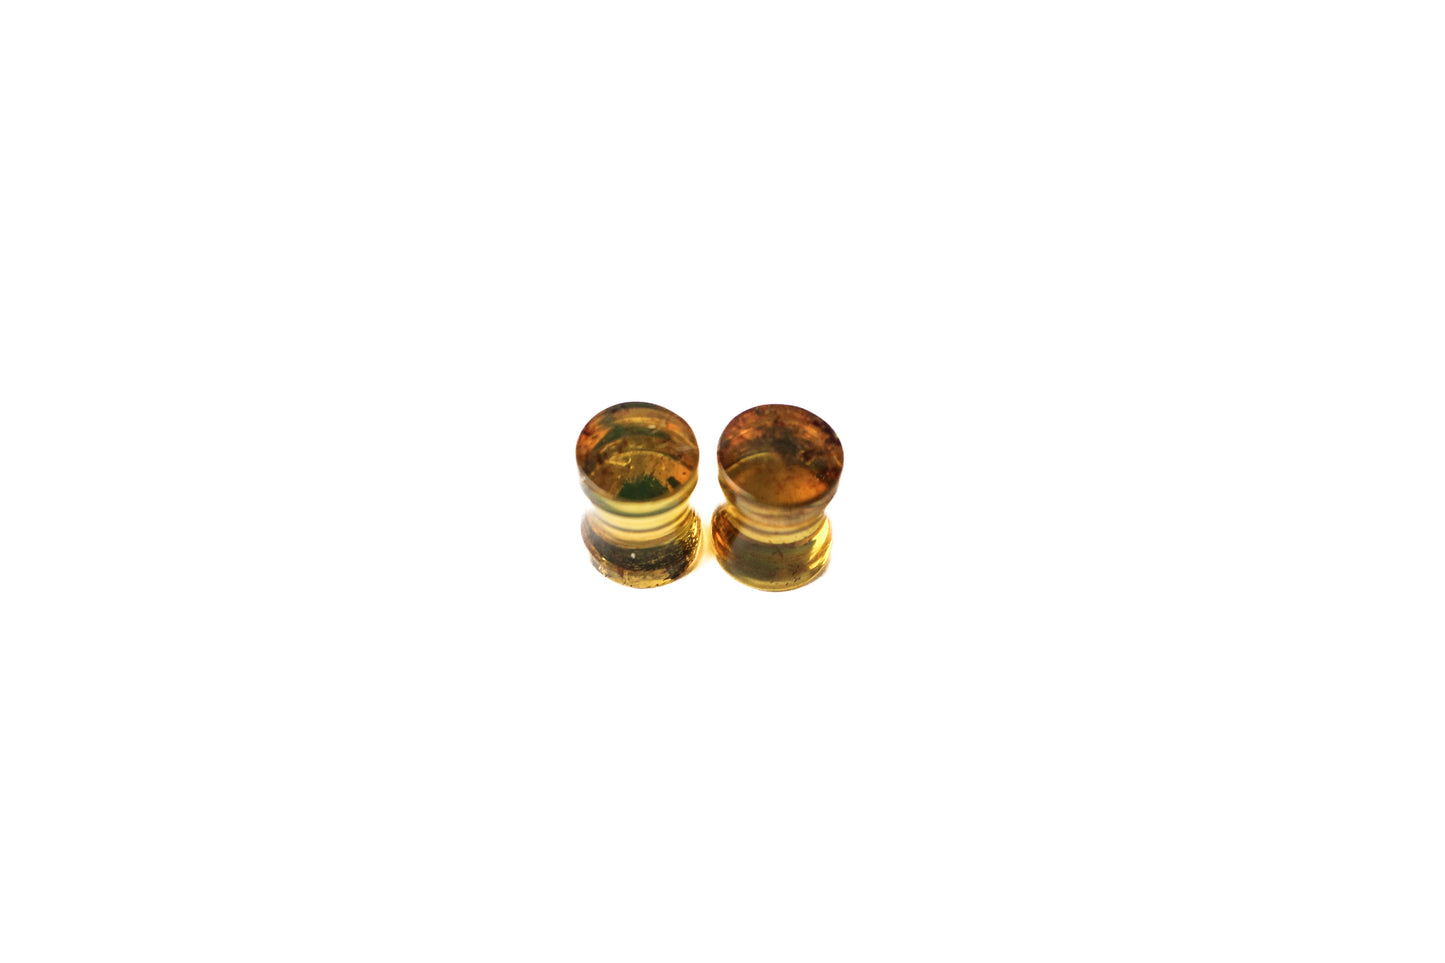 0G (8mm) - Chiapas Amber Double Flare Plugs